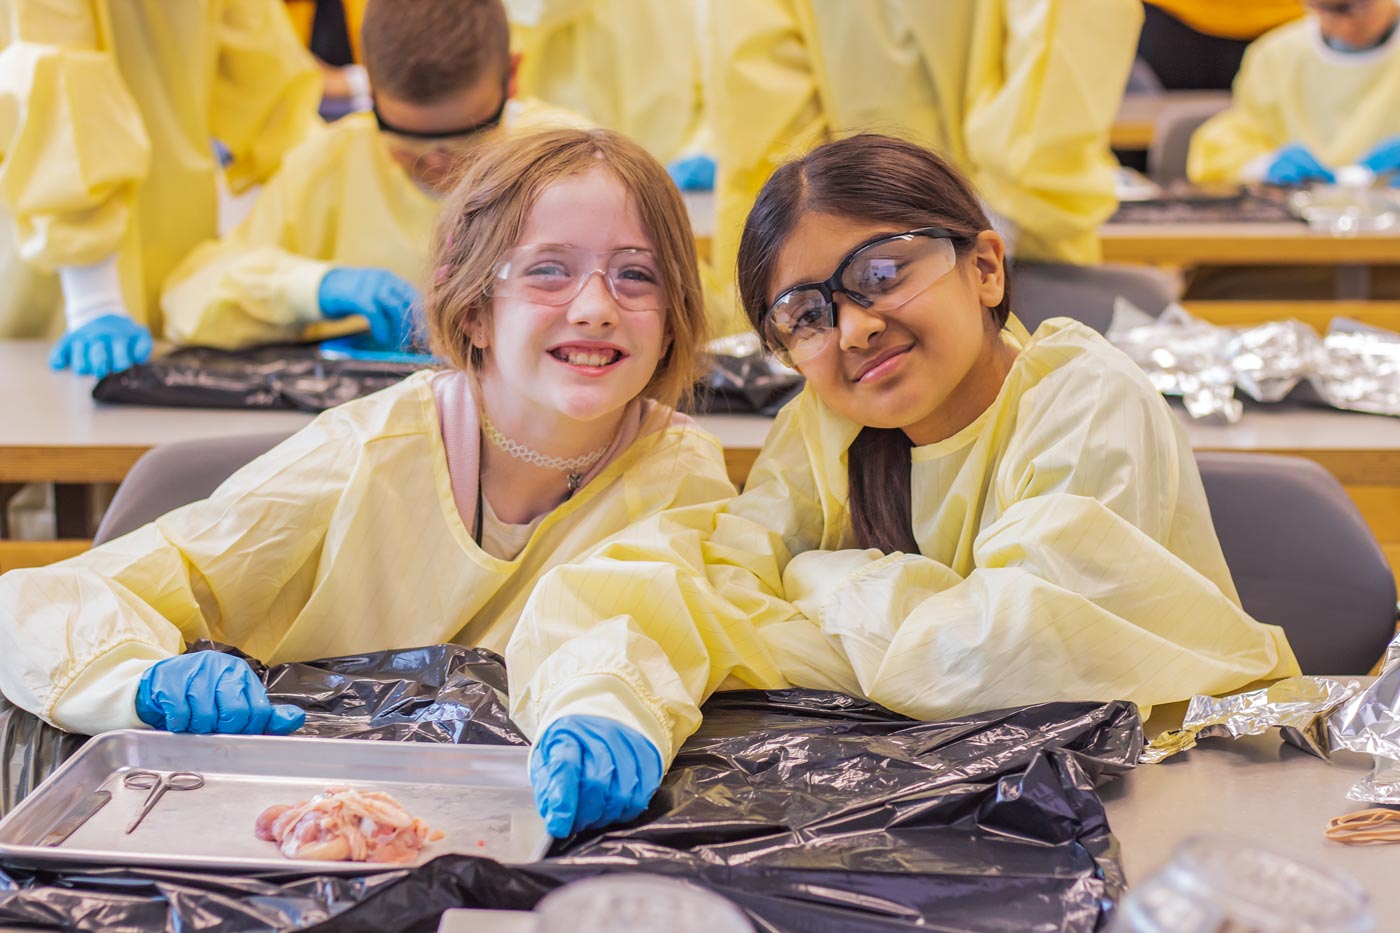 Two children dissecting a specimen